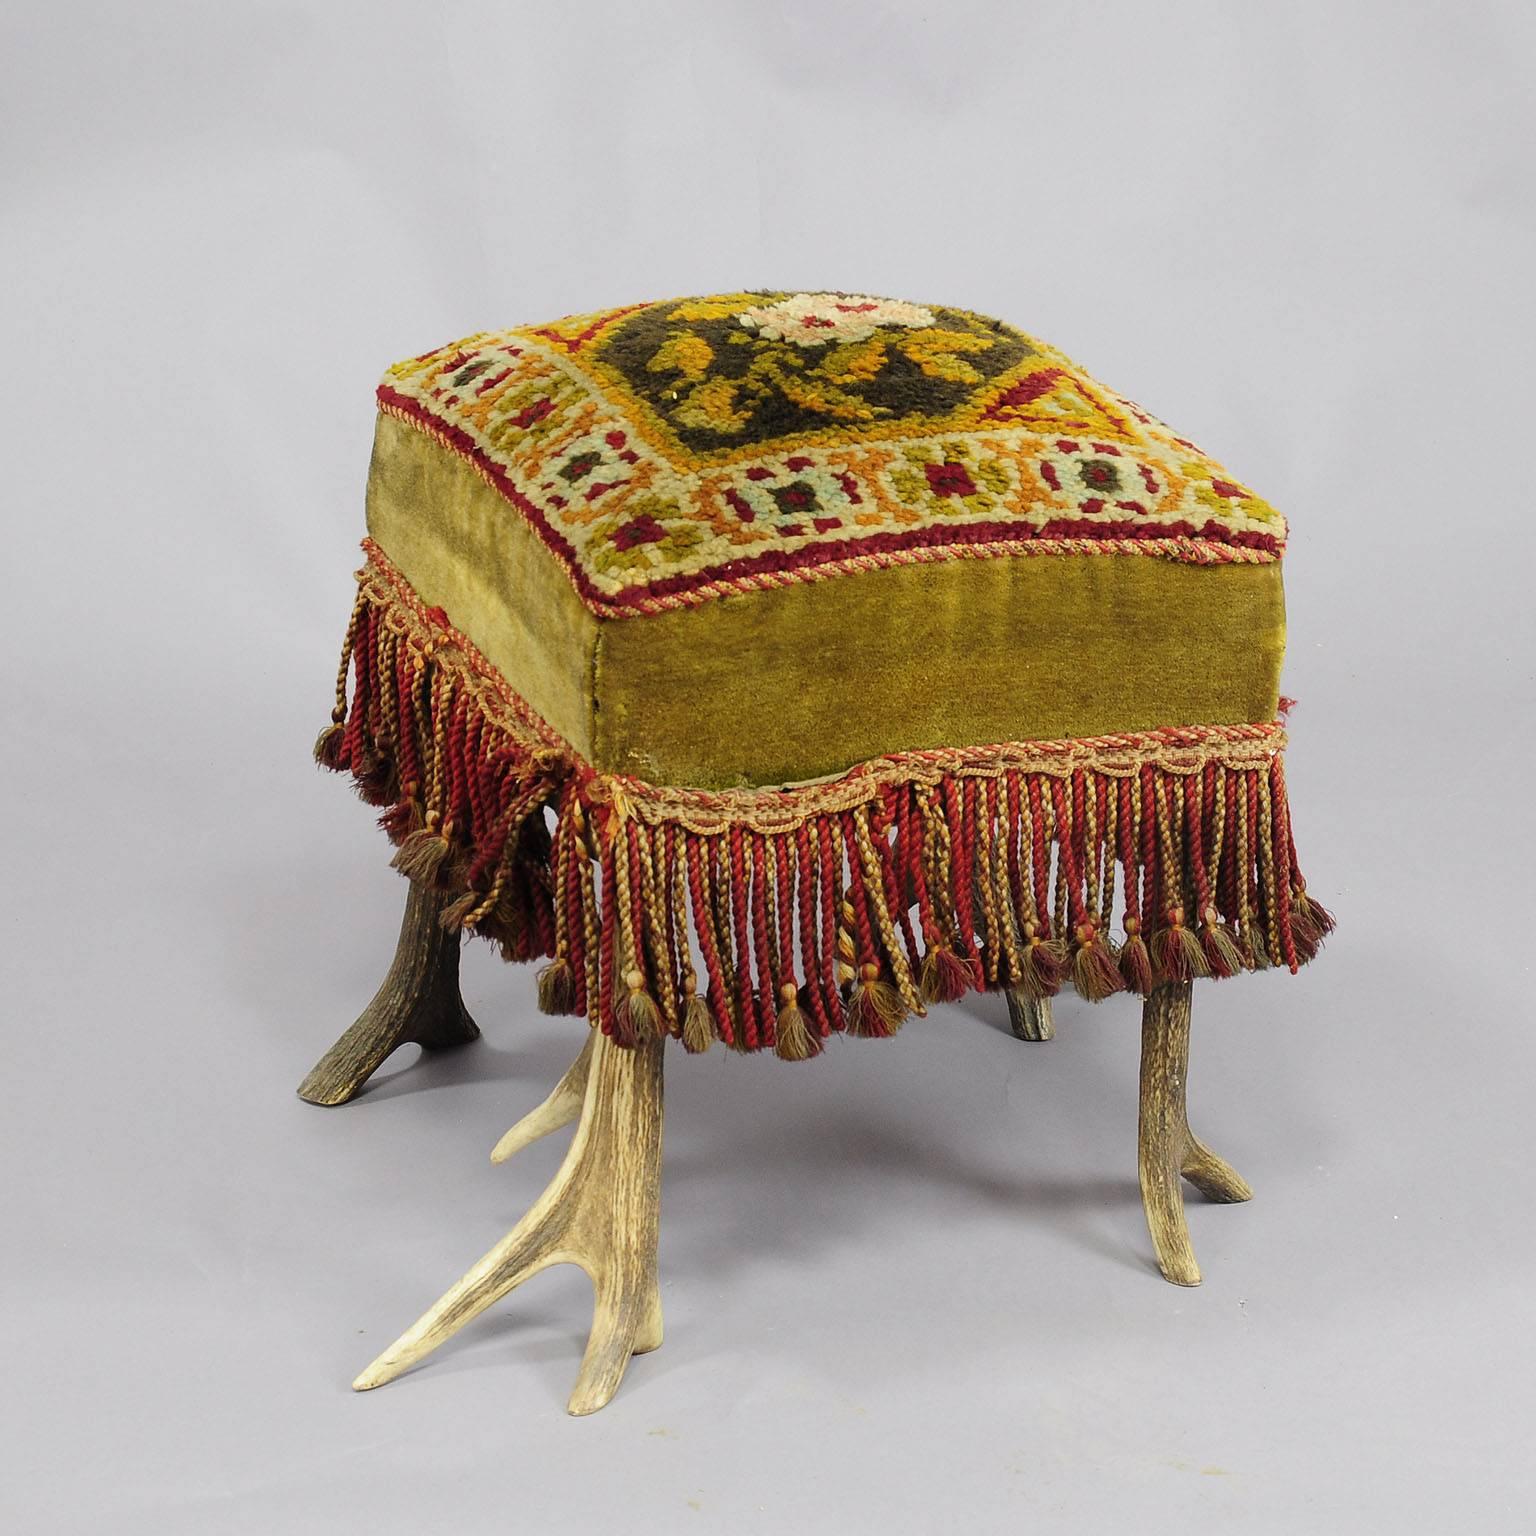 A traditional colorful antler stool with original deer horns as chair legs. The seating surface is hand-woven. Executed, circa 1900.